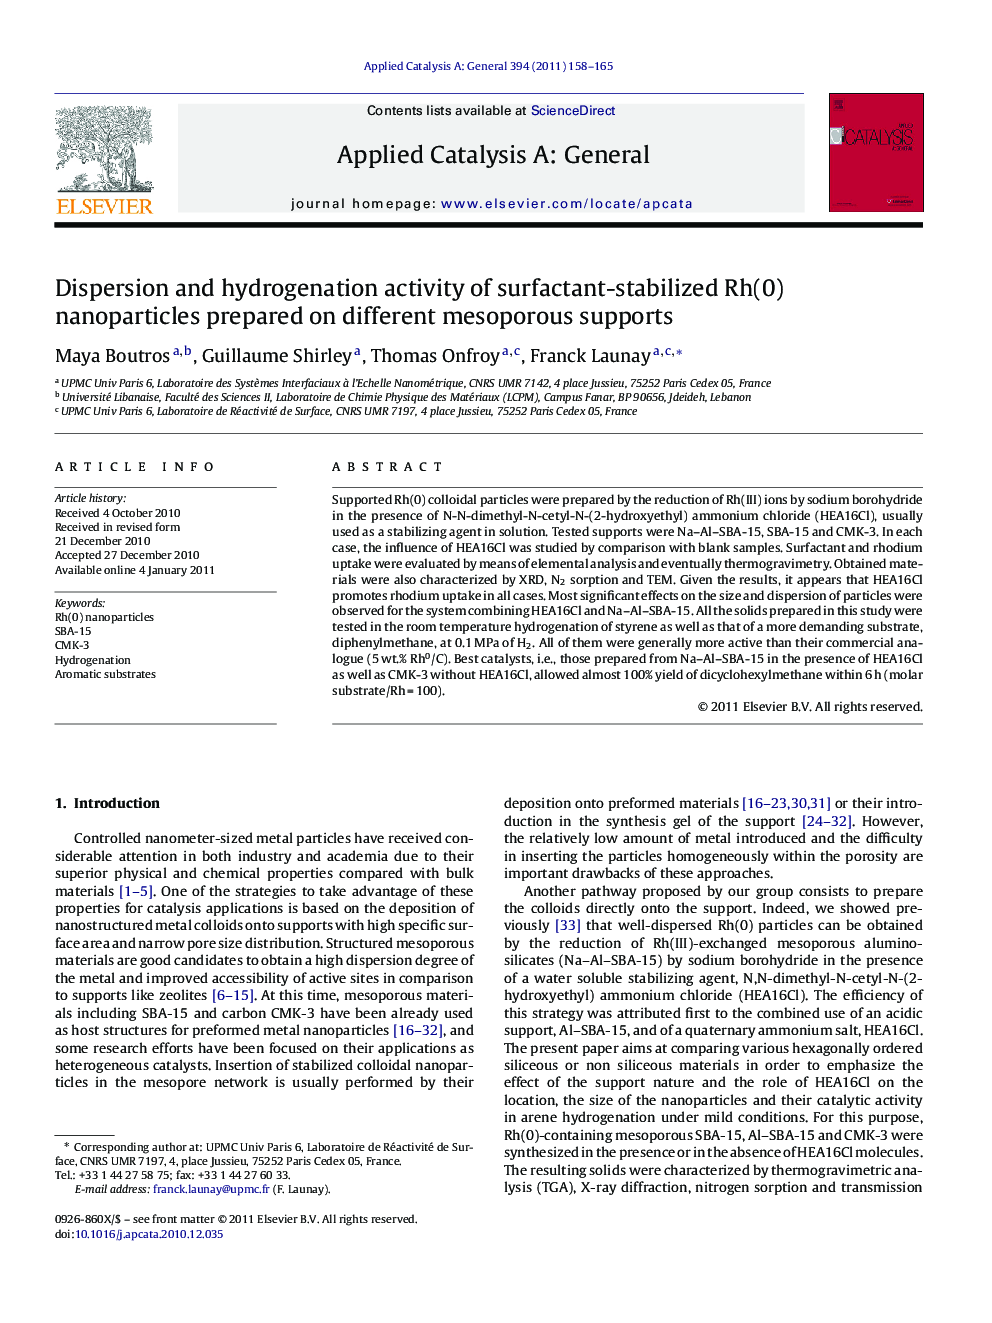 Dispersion and hydrogenation activity of surfactant-stabilized Rh(0) nanoparticles prepared on different mesoporous supports